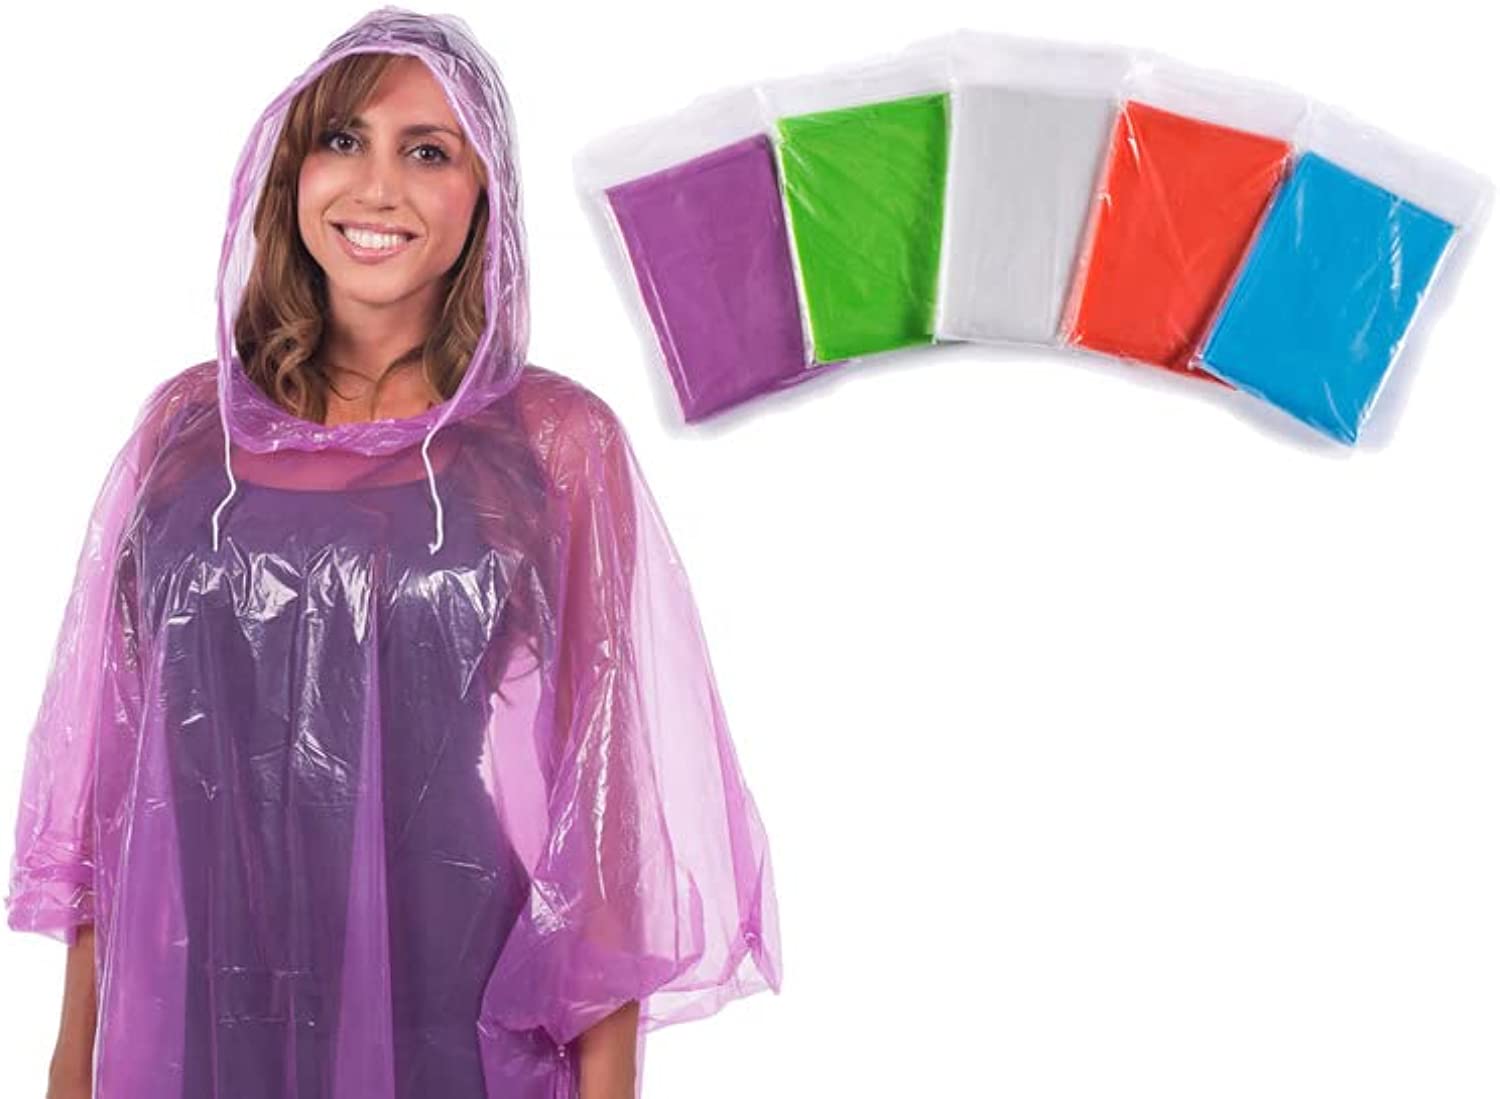 Clear Harbour Emergency Disposable Rain Poncho Pack for Adults | Women and Men’s Rain Ponchos in Bulk | Extra Thick, Waterproof Reusable .03mm PE Plastic Material for Travel, Survival, and Fun.